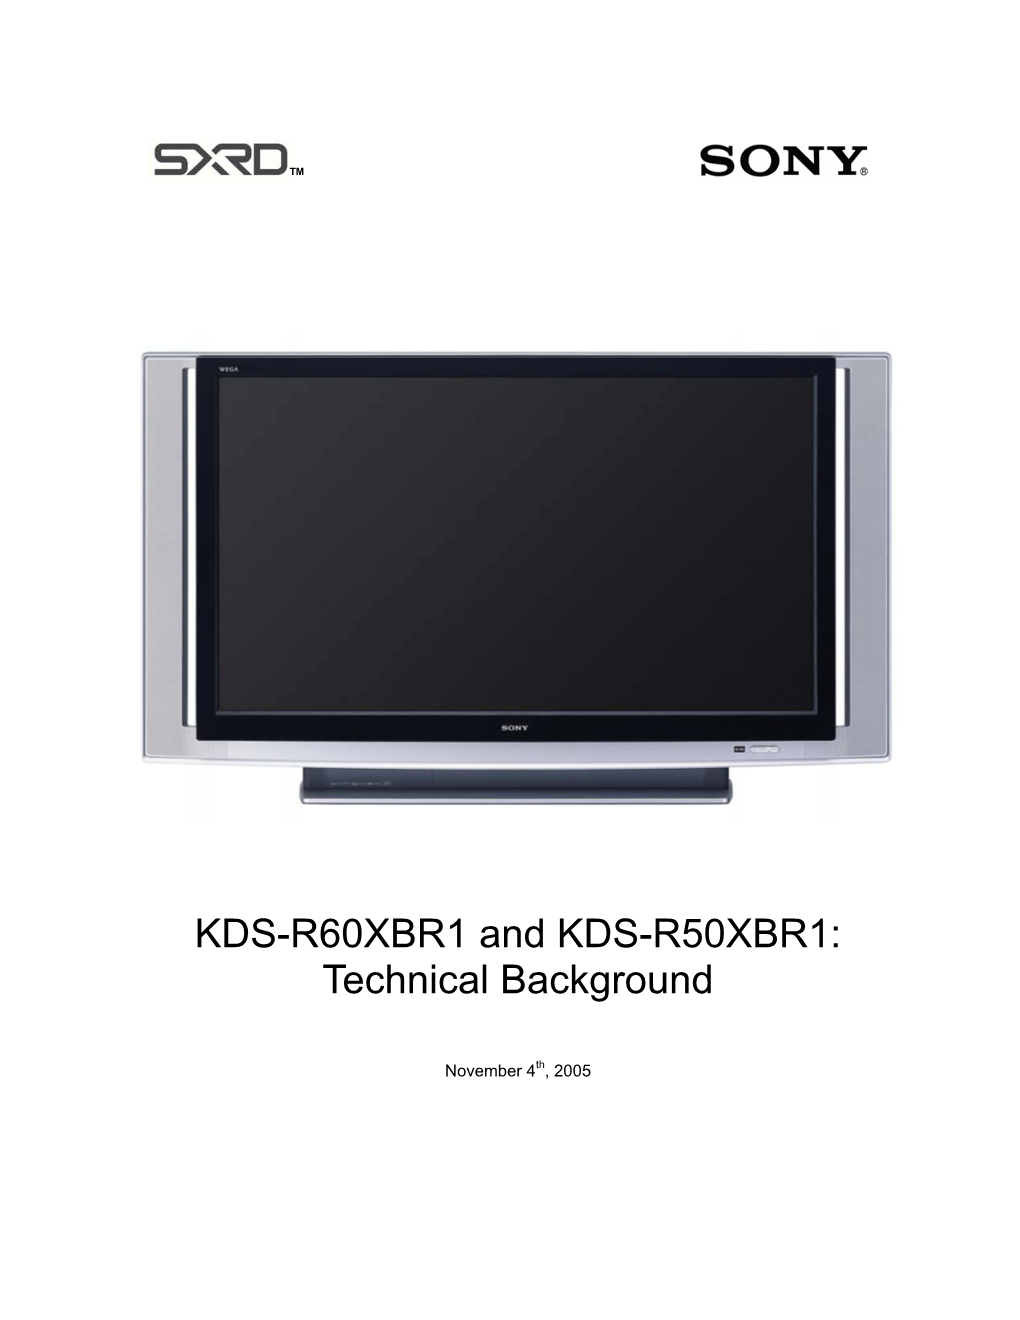 KDS-R60XBR1 and KDS-R50XBR1: Technical Background